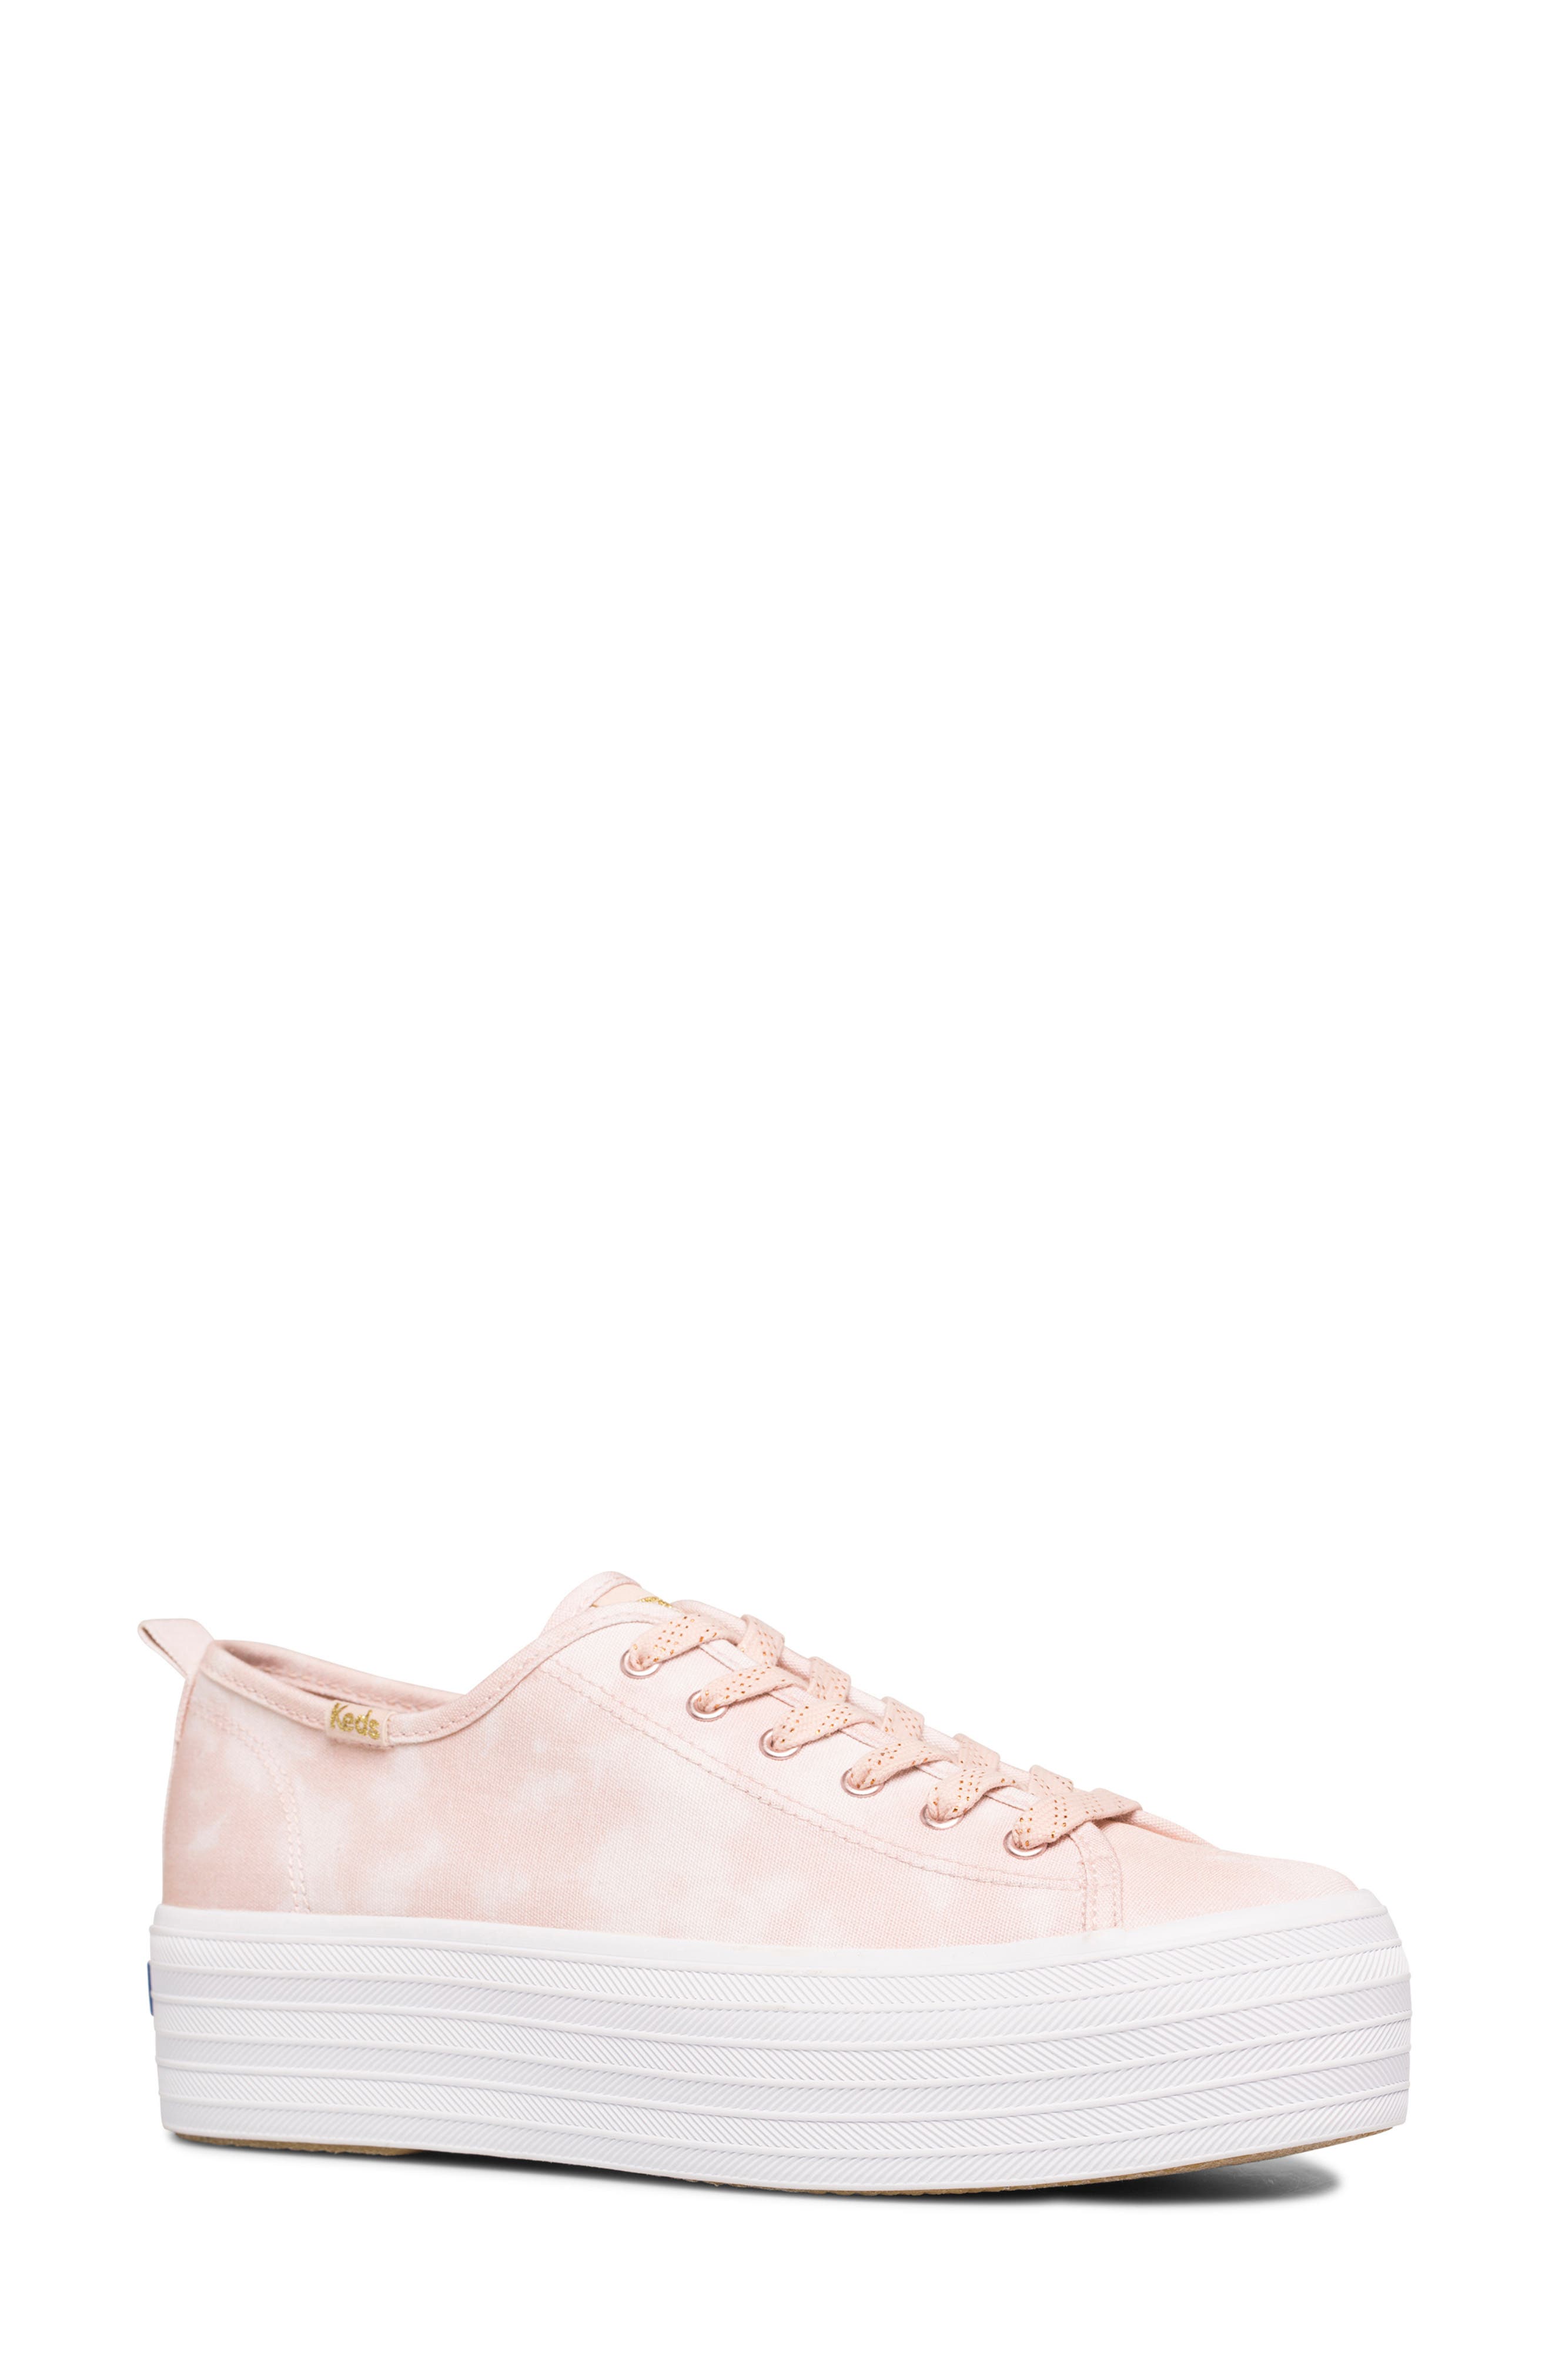 white and pink sneakers womens